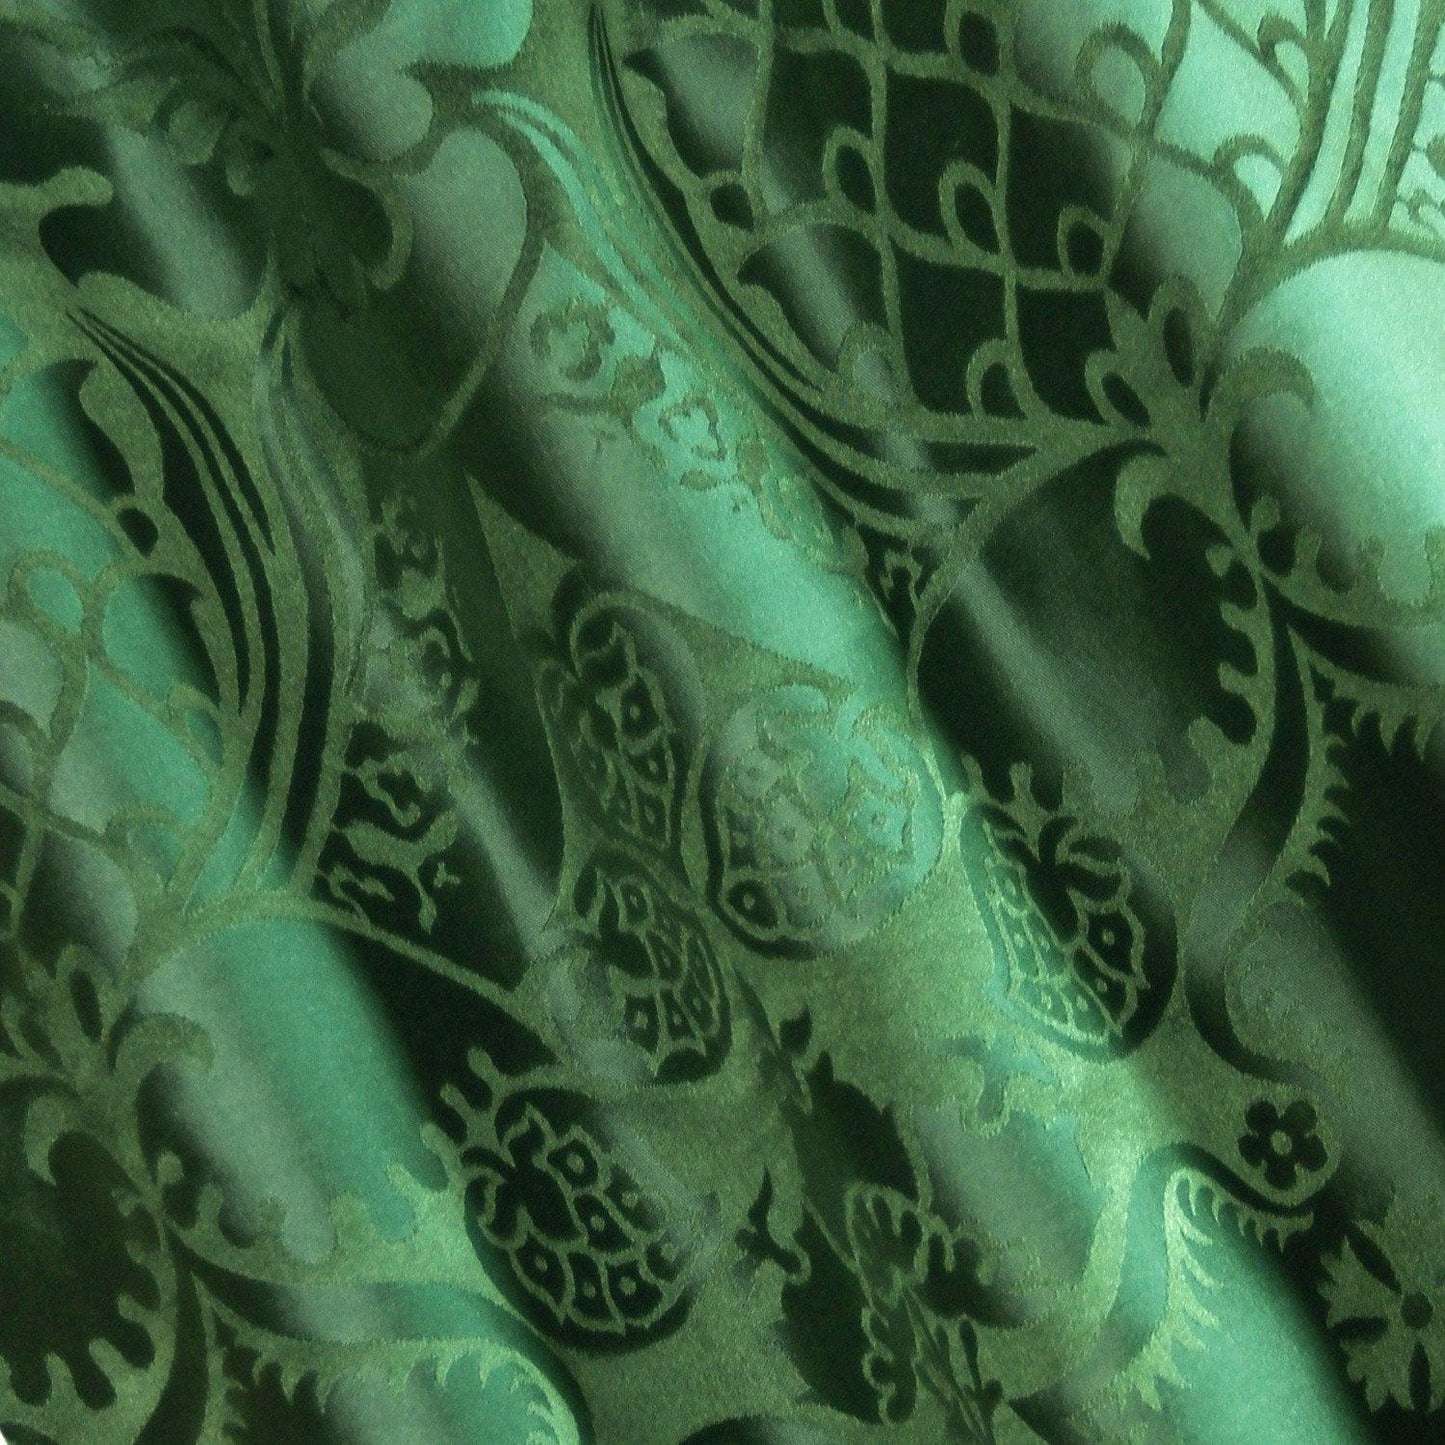 Comper Cathedral Silk Damask - Green - Watts & Co. (international)